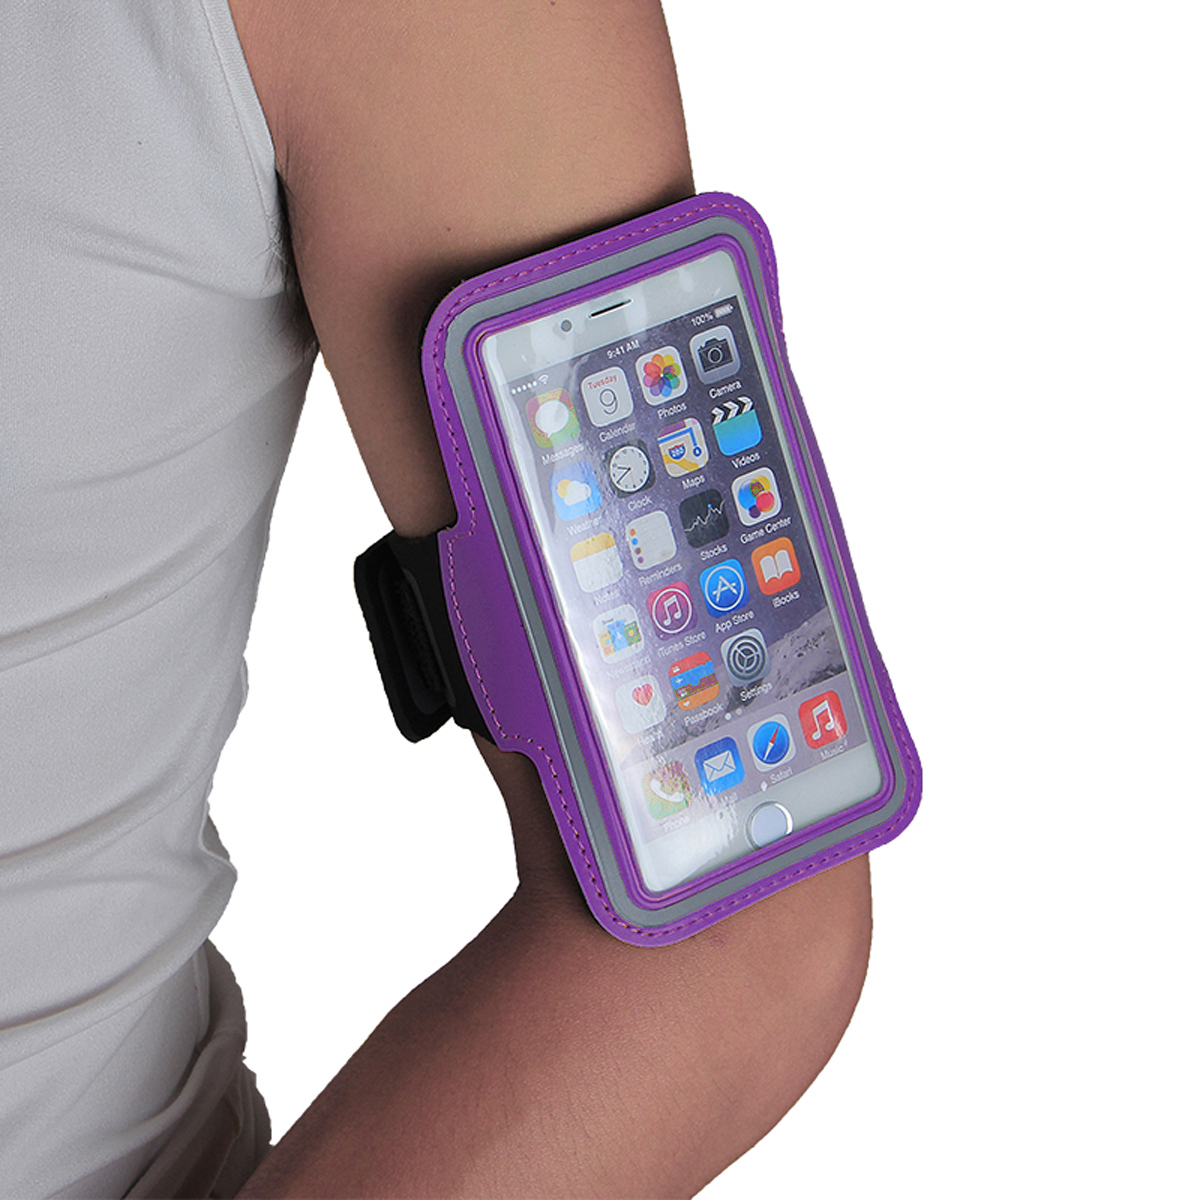 Universal-Sports-Elastic-Armband-Sweatproof-Touch-Screen-Mobile-Phone-Arm-Bags-with-Earphone-Port-fo-1890480-12